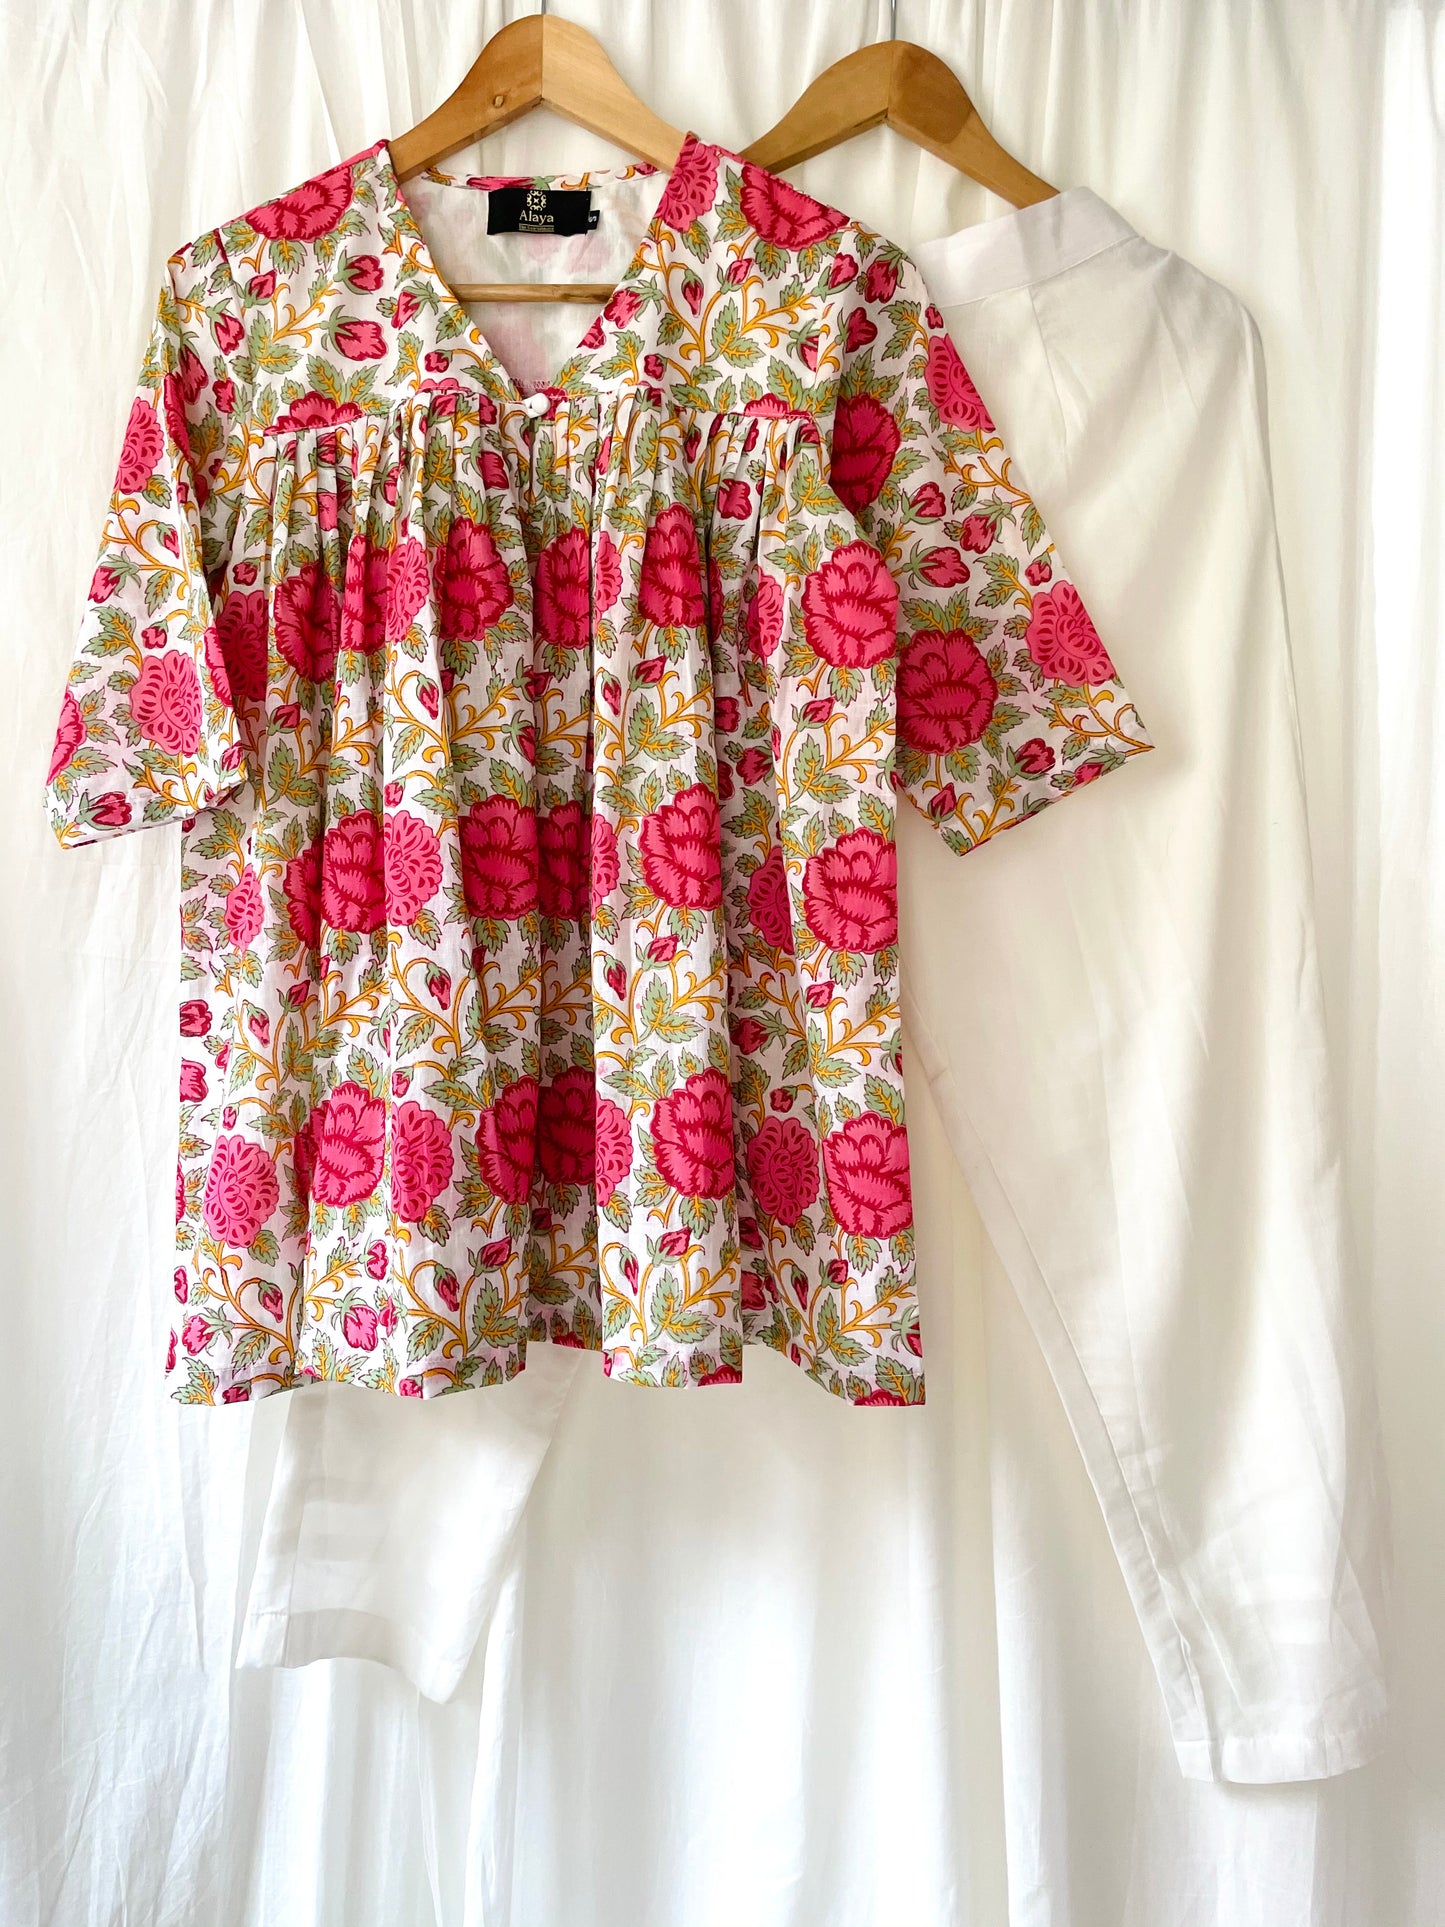 Rose Garden Blockprinted Top with solid White Pants